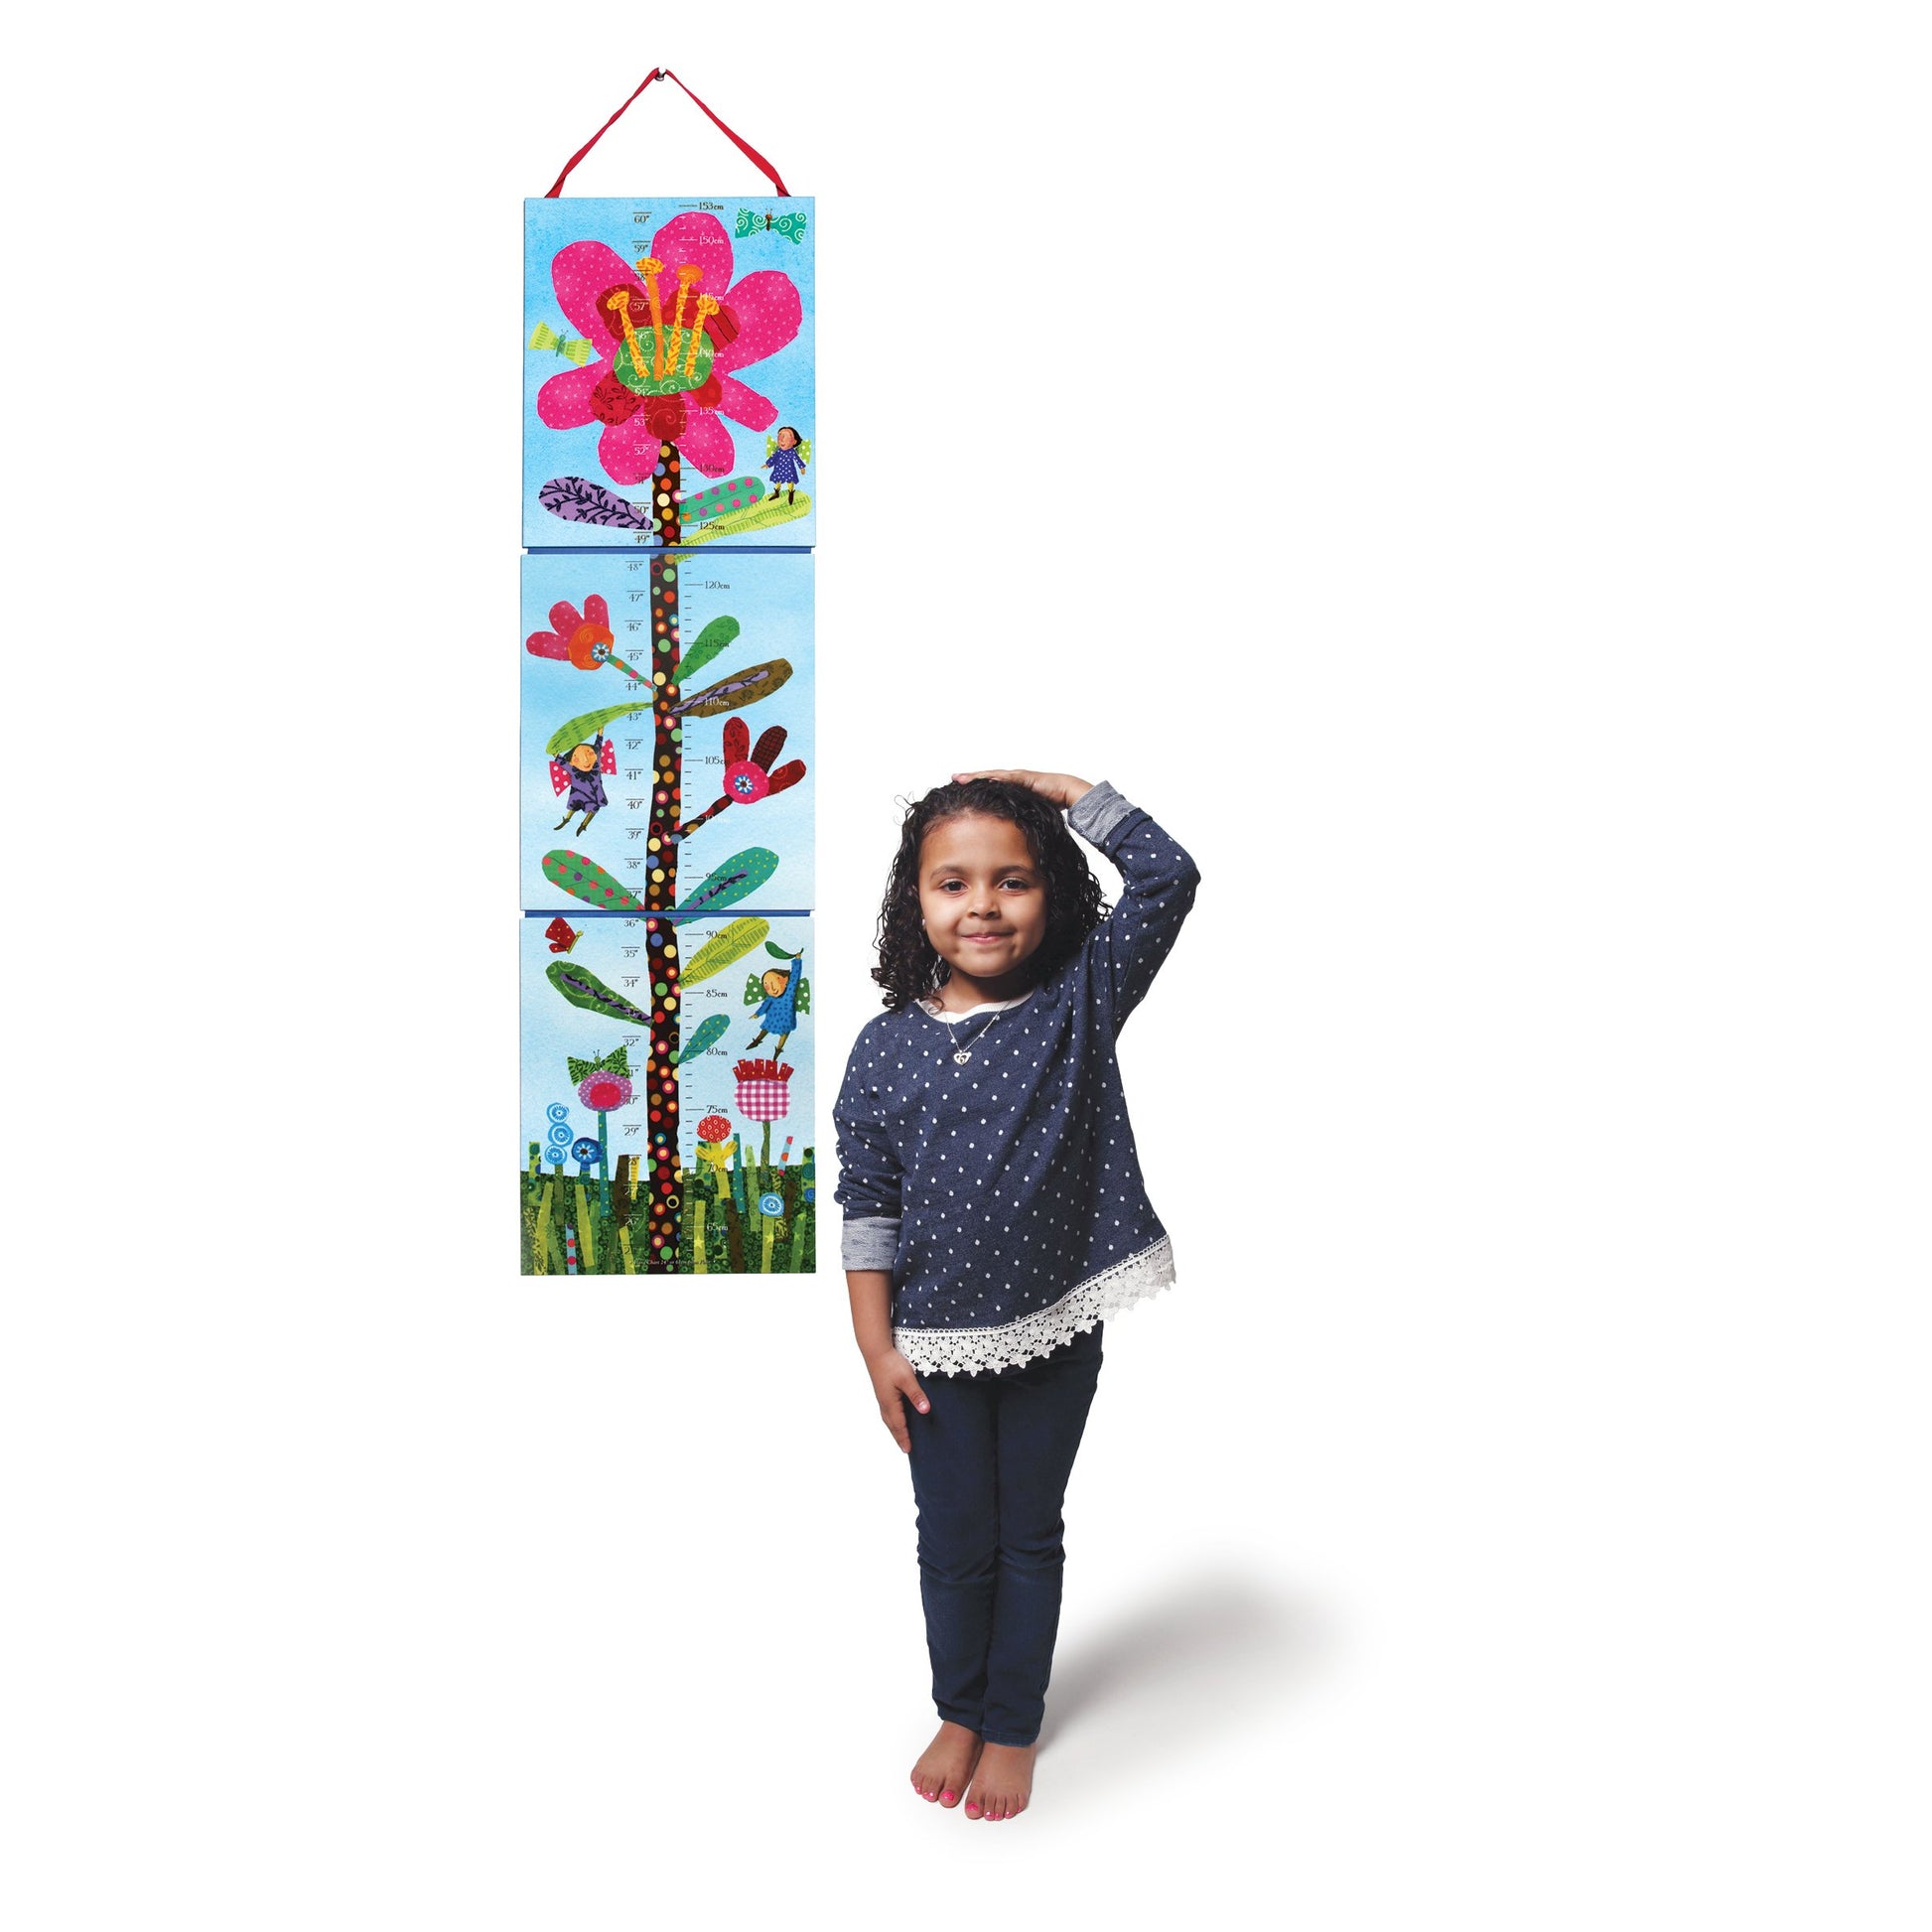 eeBoo Growth Chart Hot Pink Flower E The Toy Wagon